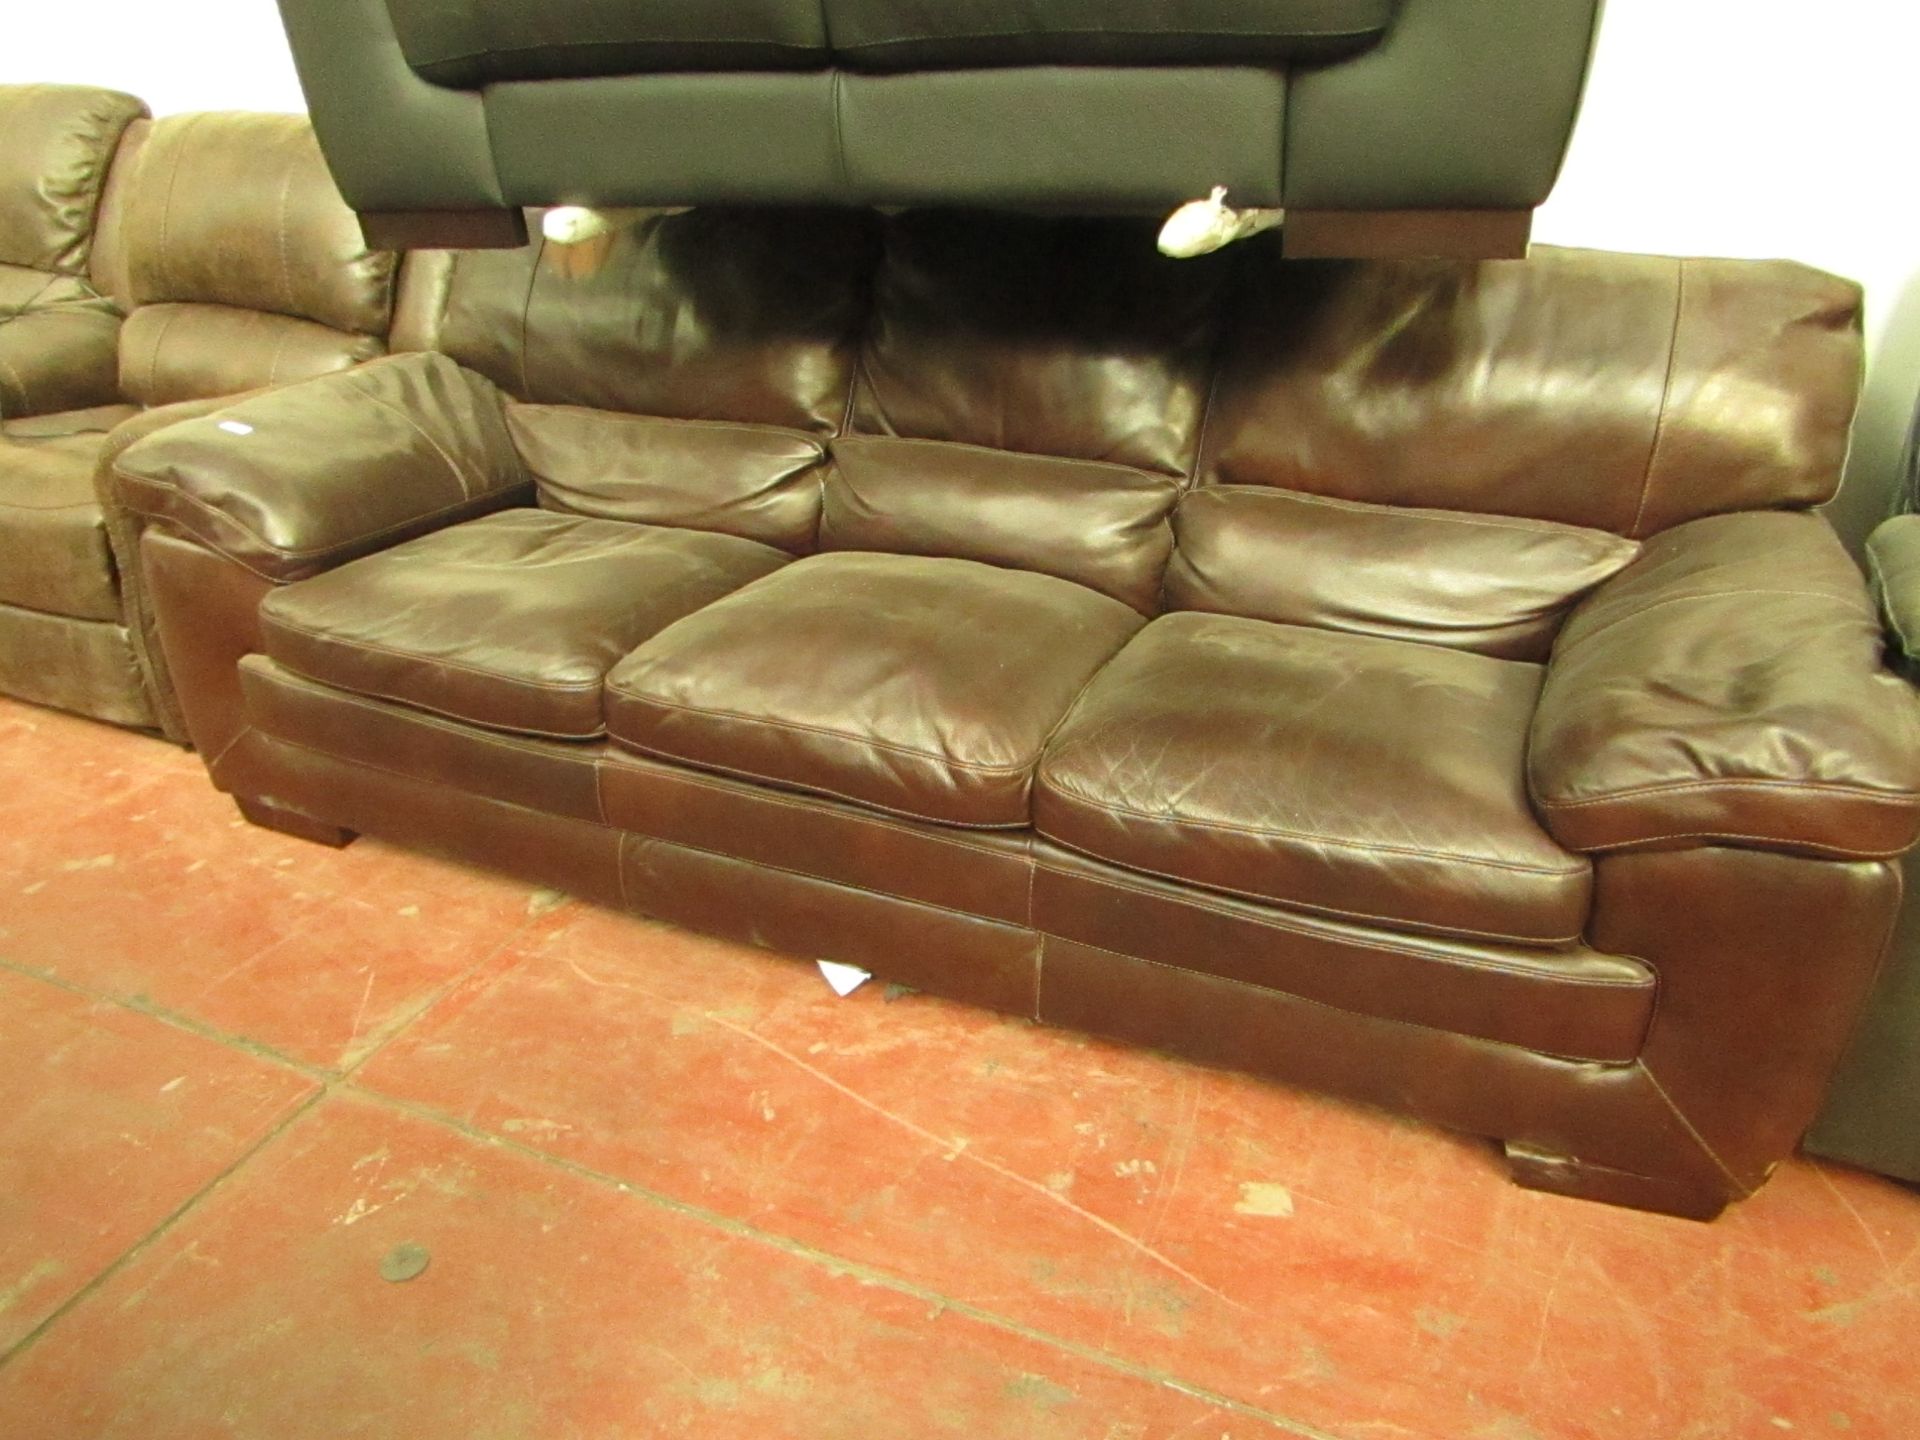 3 seater brown leather sofa with discloured patch on one head rest.